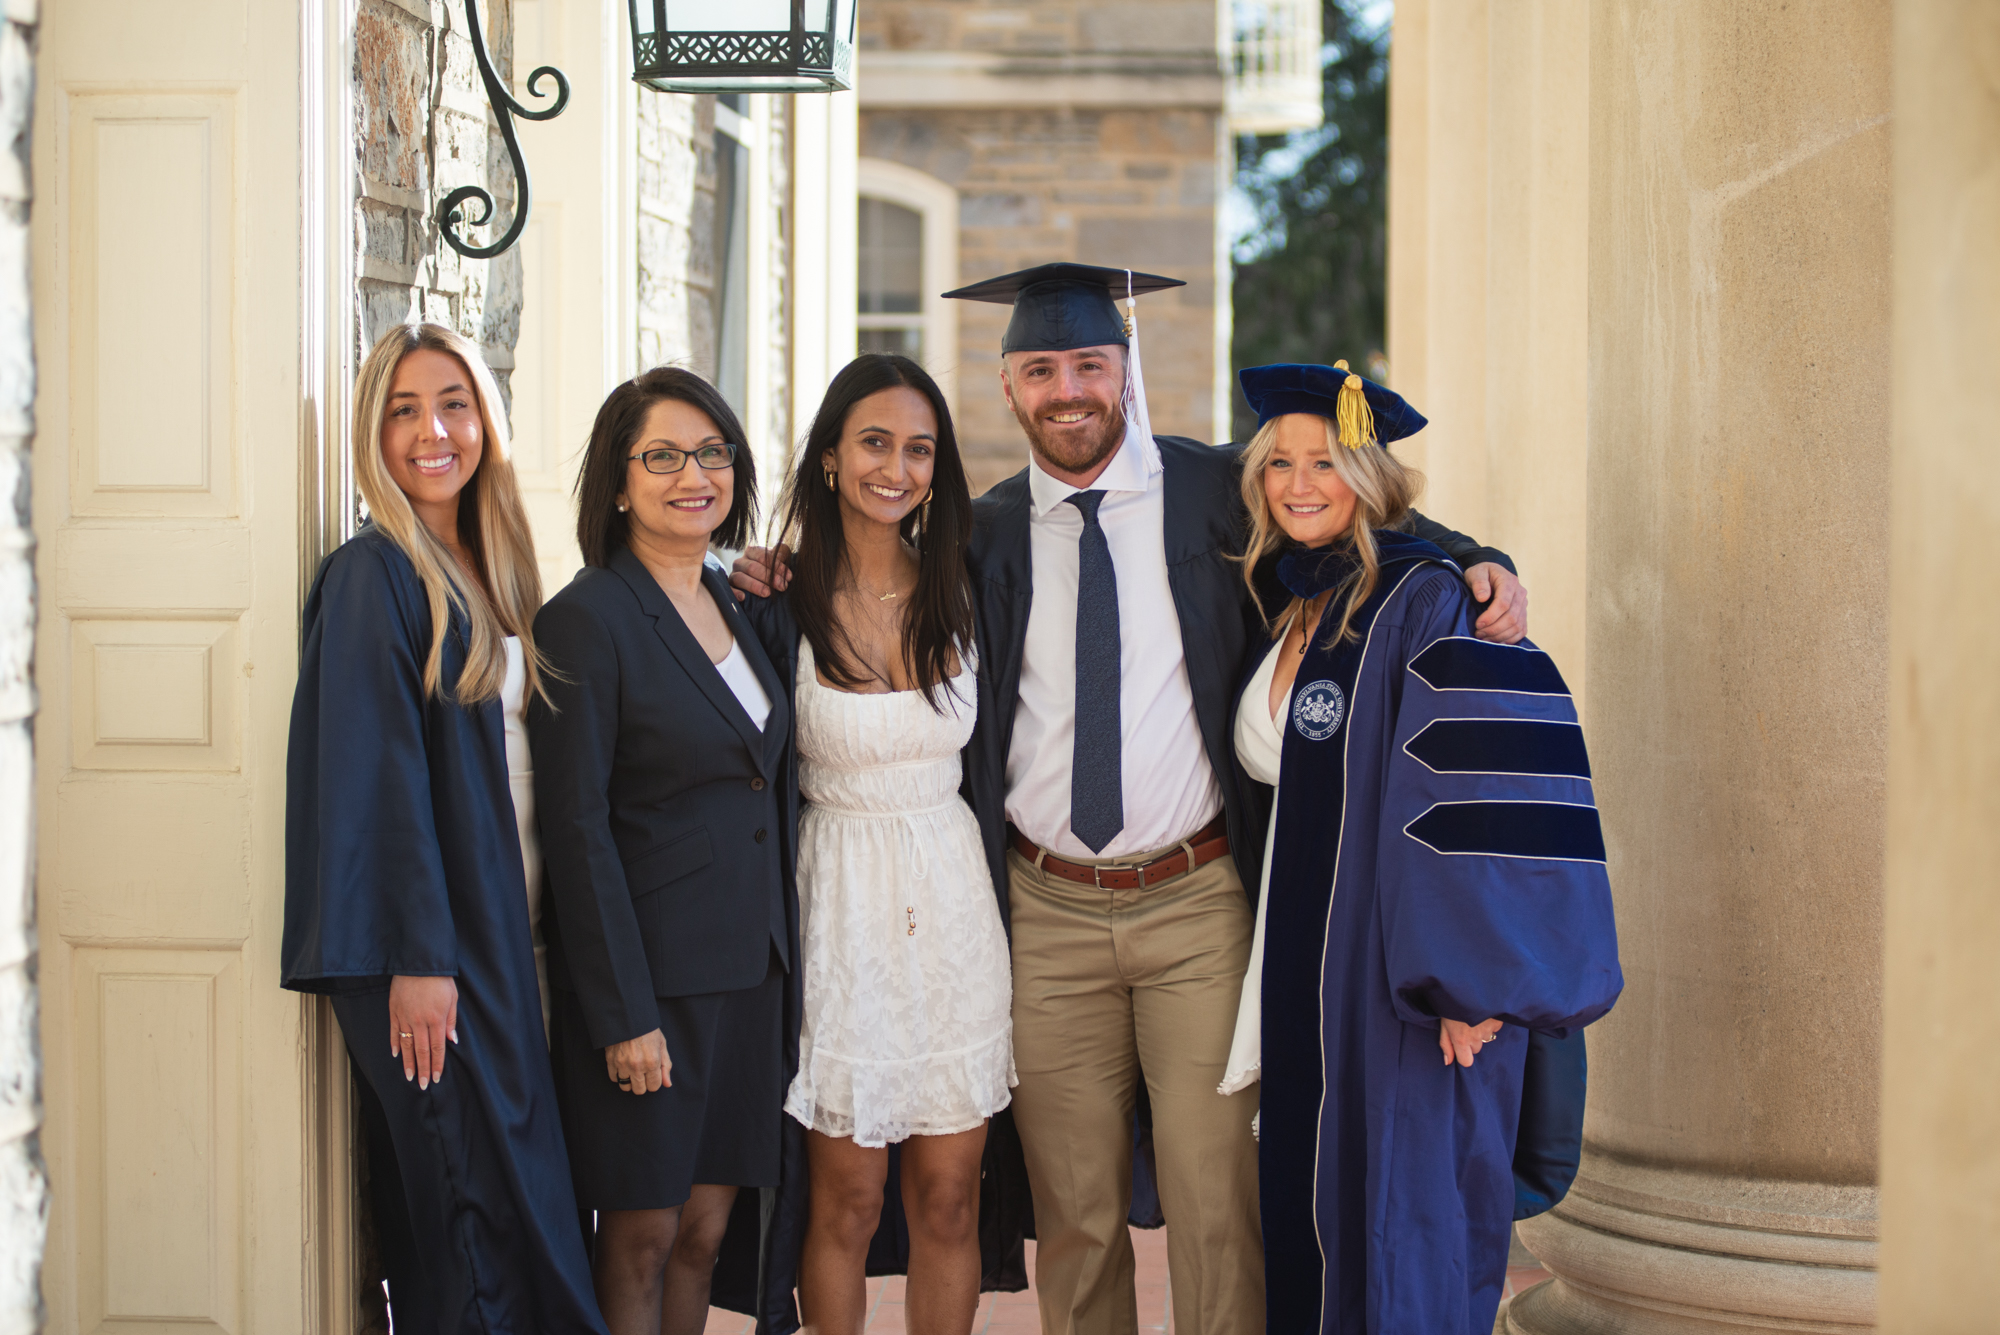 Neeli Bendapudi stands in a row with four college students dressed in graduation gaps and gowns.